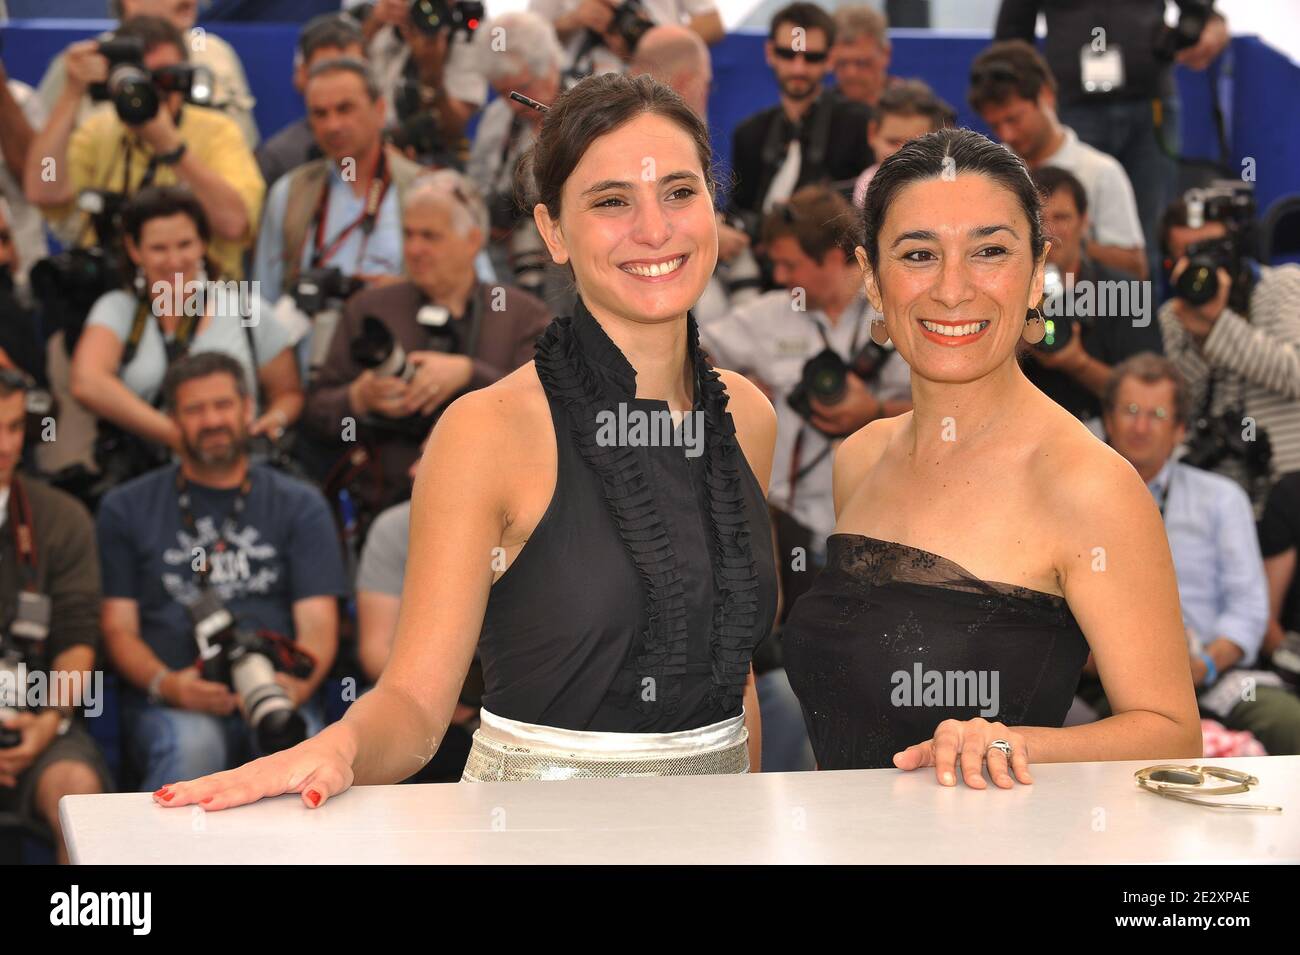 Victoria Raposo (L) and Eva Bianco attending the photocall for 'Los Labios' during the 63rd Cannes Film Festival in Cannes, France on May 18, 2010. Photo by Hahn-Nebinger-Orban/ABACAPRESS.COM Stock Photo